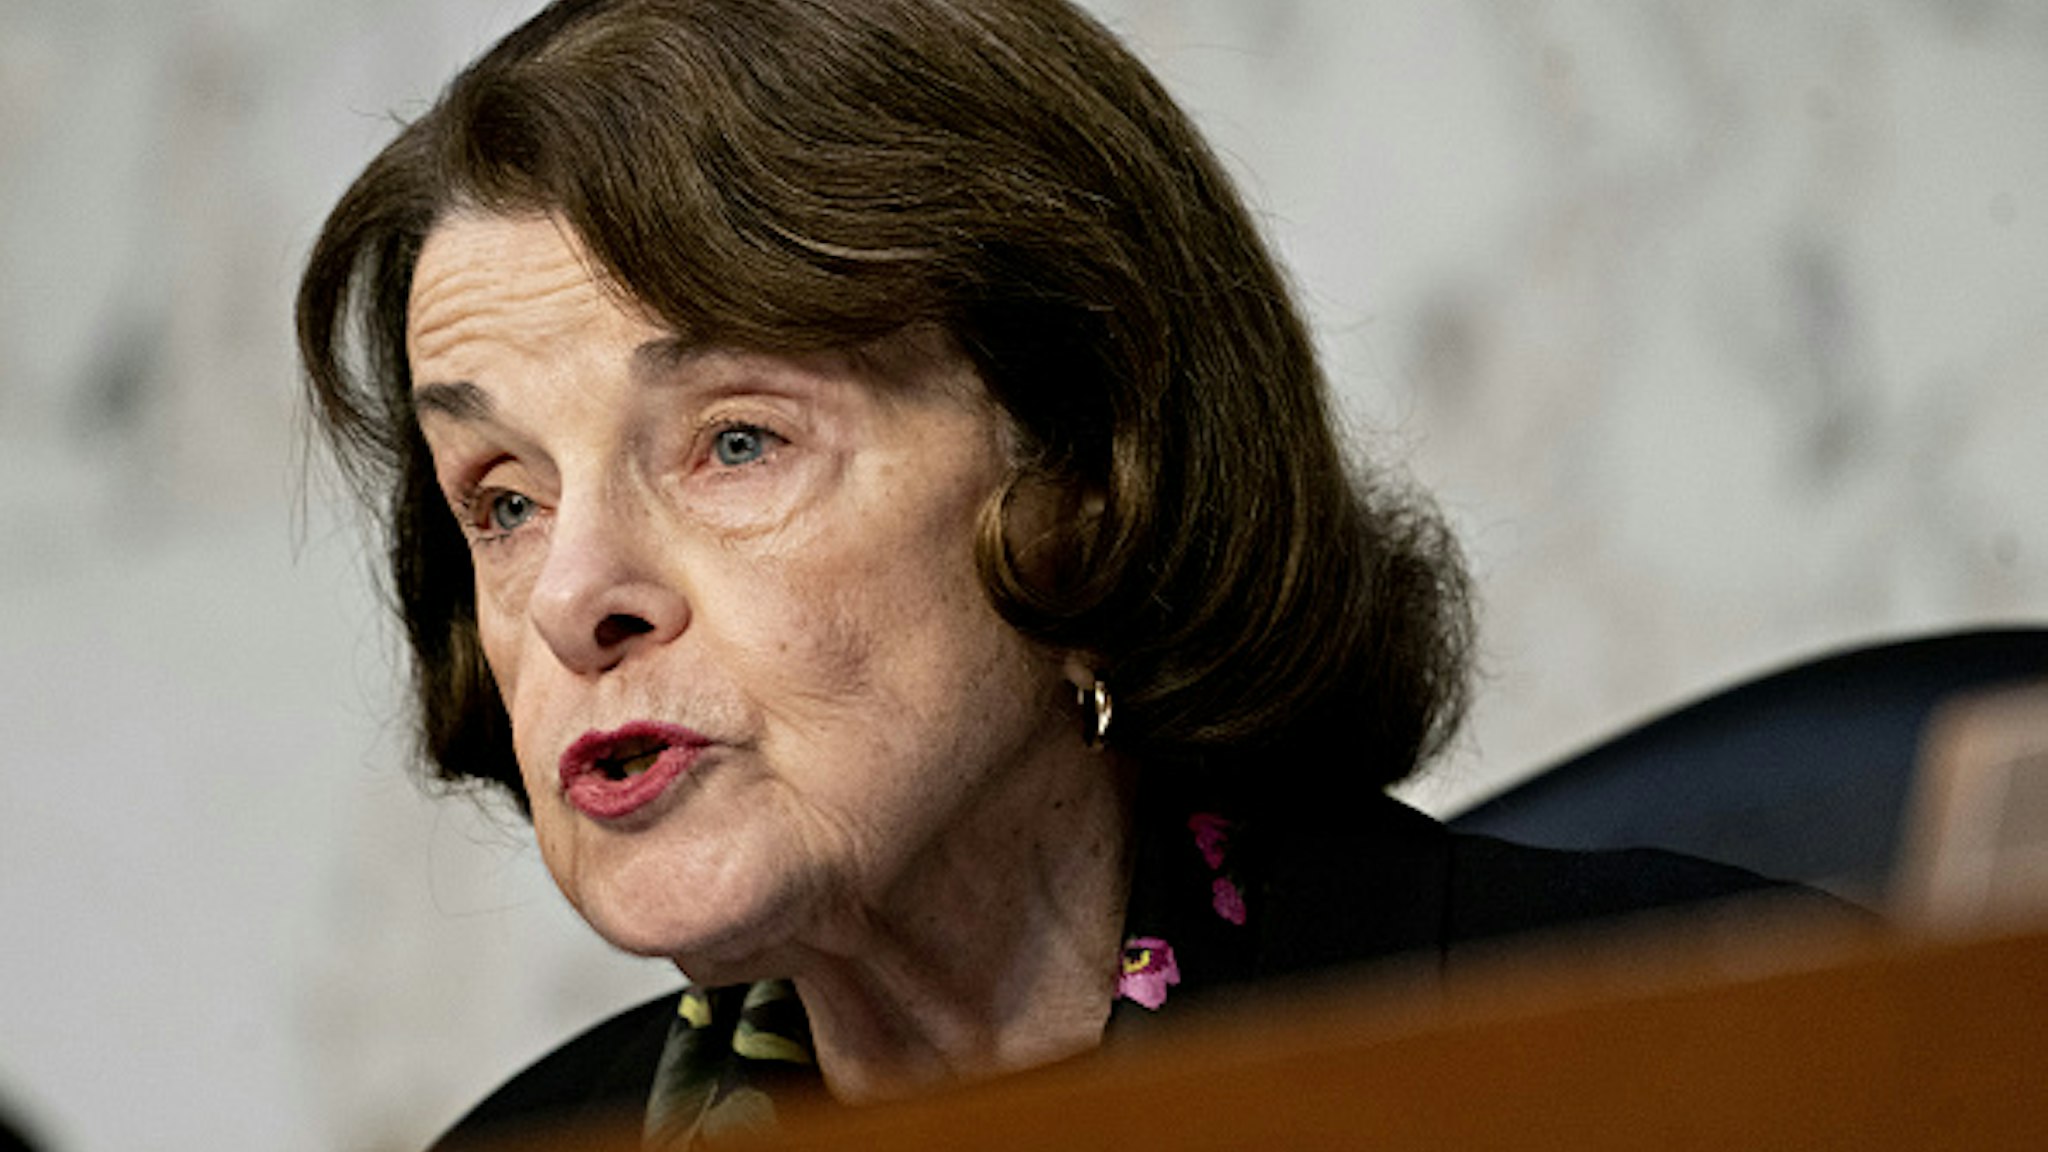 Senator Diane Feinstein, a Democrat from California and ranking member of the Senate Judiciary Committee, makes an opening statement during a hearing with Justice Department Inspector General Michael Horowitz, not pictured, in Washington, D.C., U.S., on Wednesday, Dec. 11, 2019. Horowitz released a long-anticipated report Monday into the FBI's investigation in 2016 of people associated with Donald Trump's presidential campaign.